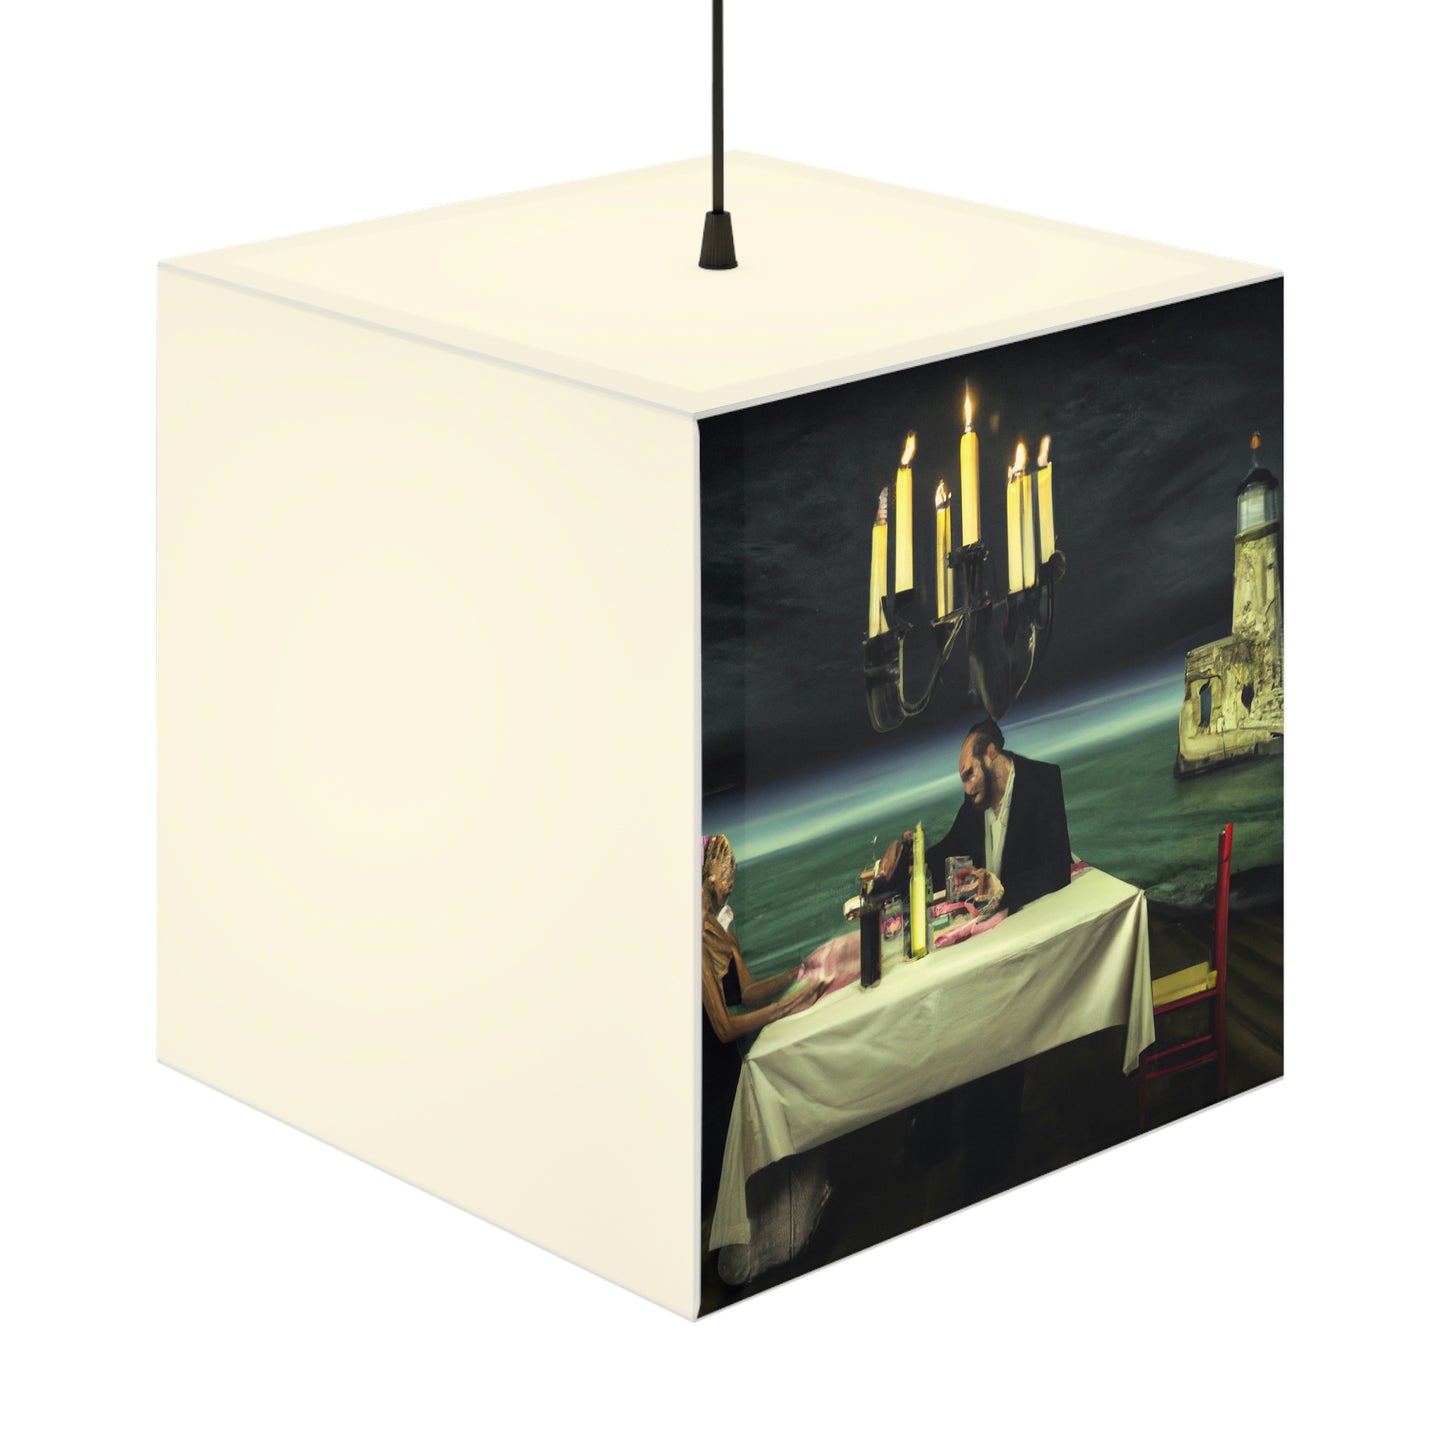 "A Beacon of Romance: An Intimate Candlelit Dinner in a Forgotten Lighthouse" - The Alien Light Cube Lamp